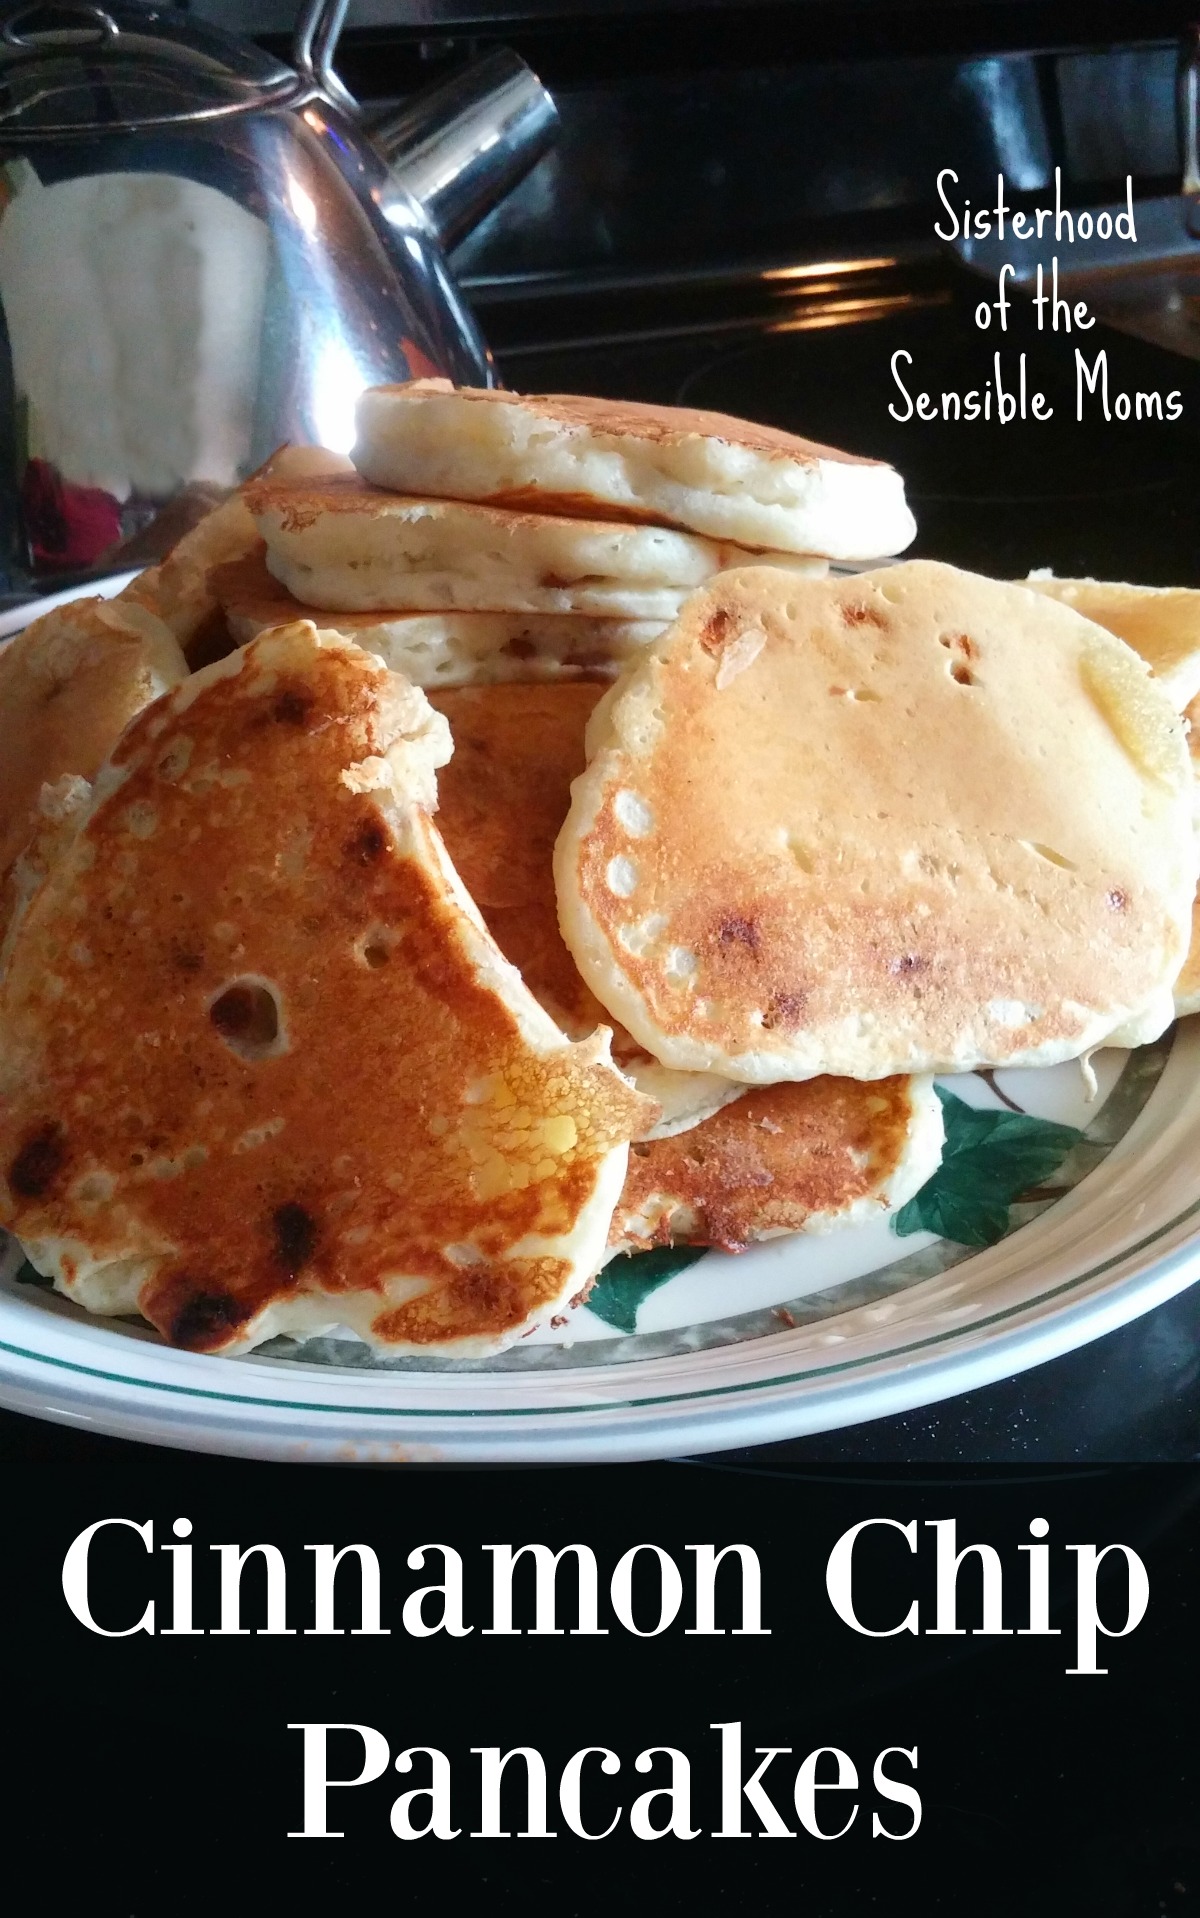 Cinnamon Chip Pancakes | Looking for inexpensive, easy, but heartfelt Valentine's Day's ideas? This best better than basic pancake is perfect for breakfast in bed | Sisterhood of the Sensible Moms